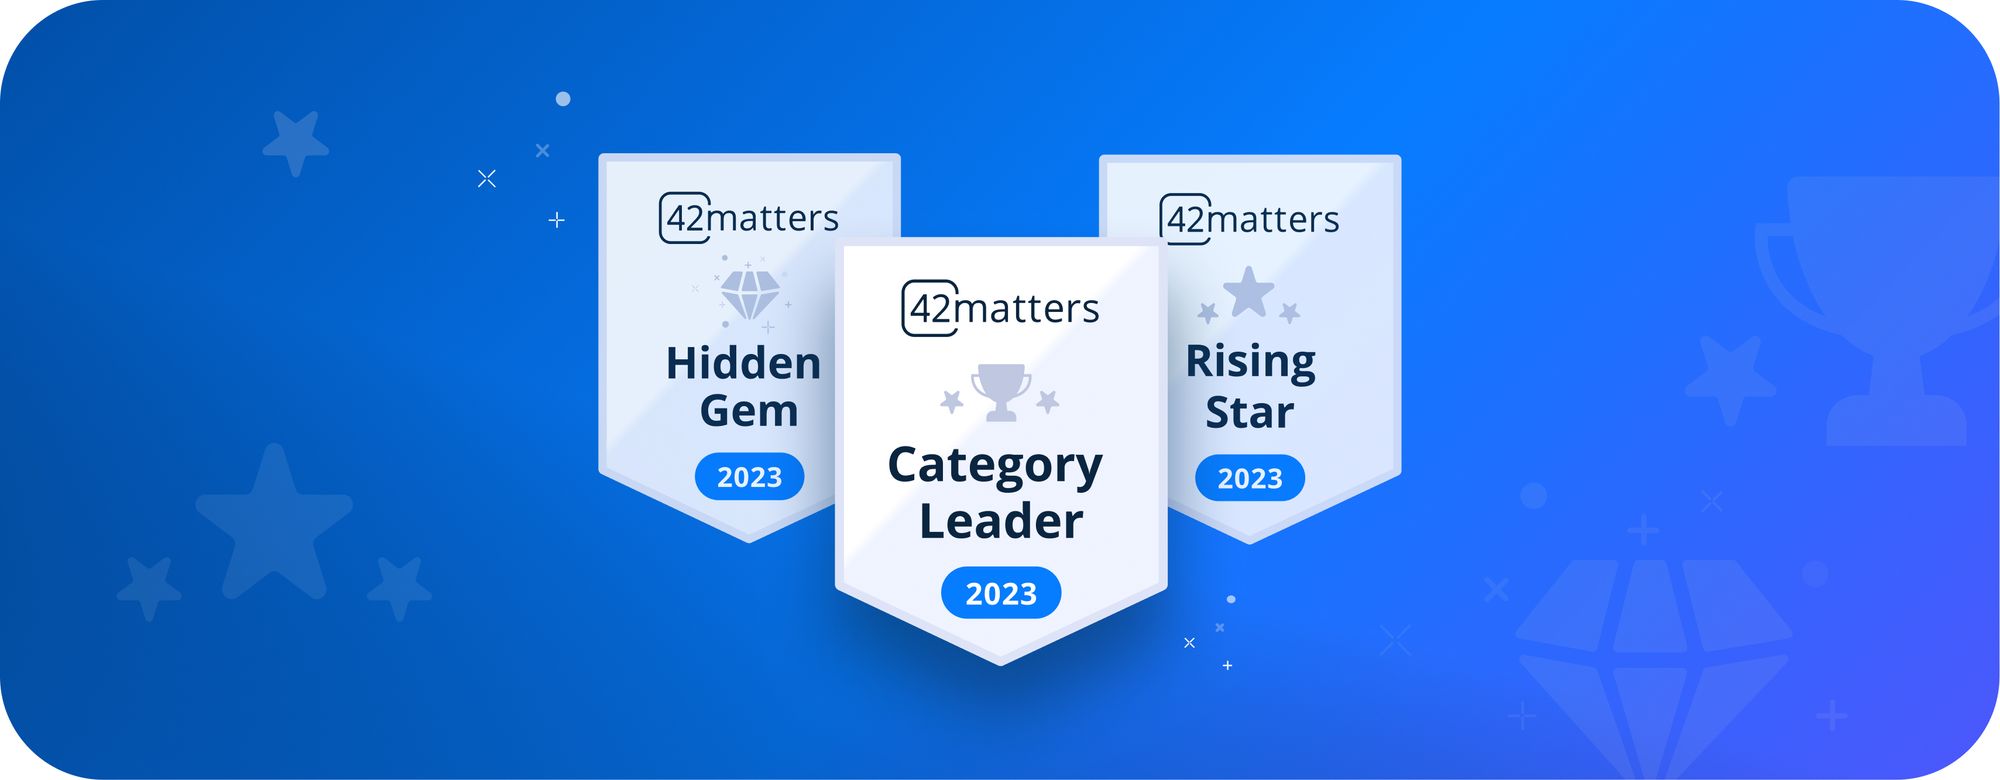 NEW: SDK Performance and Installation Badges from 42matters